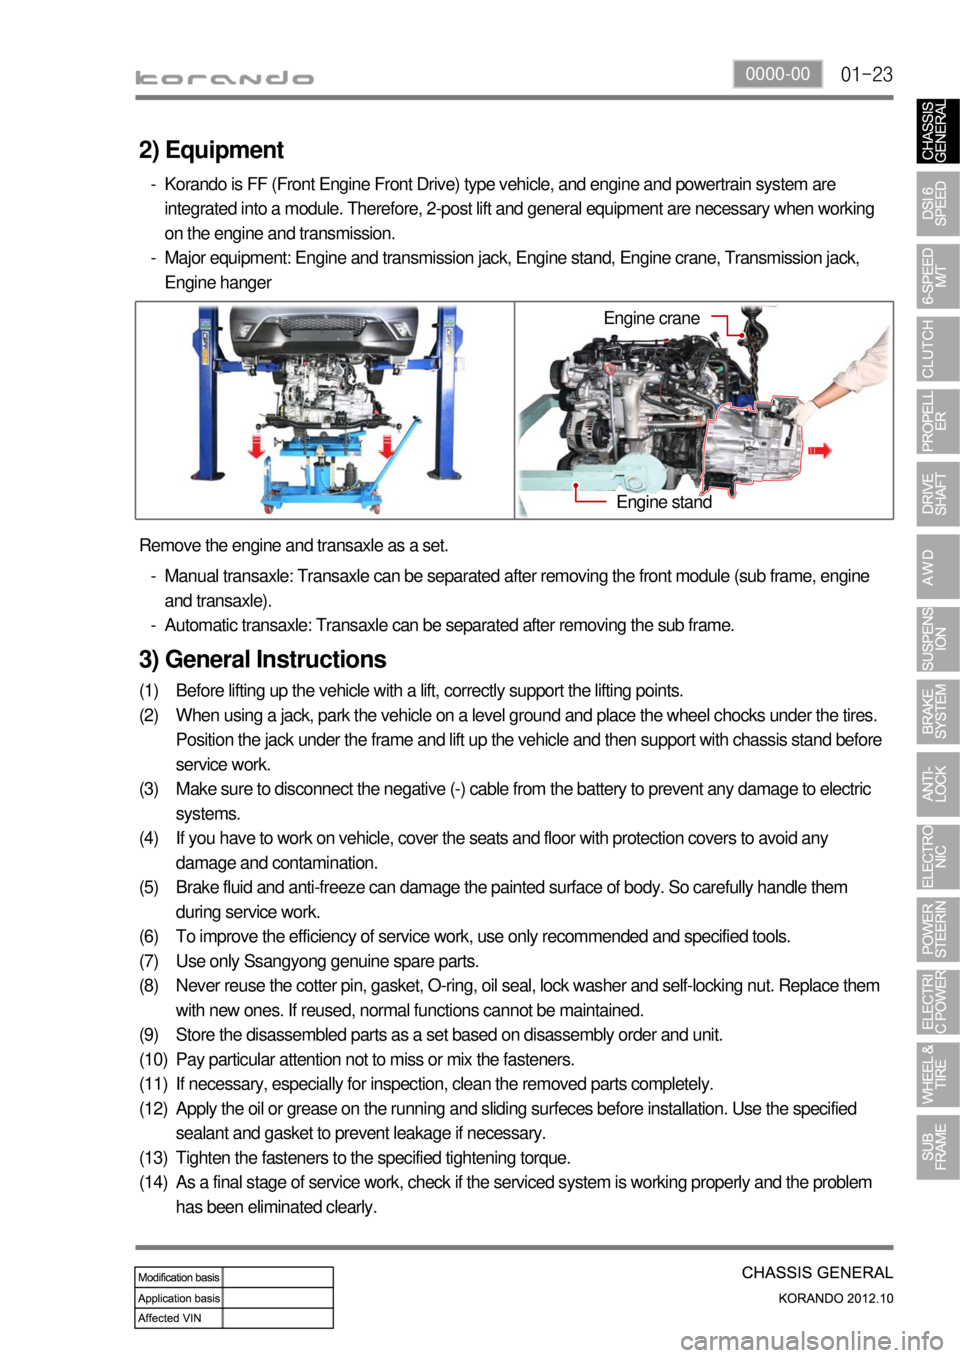 SSANGYONG KORANDO 2012  Service Manual 01-230000-00
3) General Instructions
Before lifting up the vehicle with a lift, correctly support the lifting points.
When using a jack, park the vehicle on a level ground and place the wheel chocks u